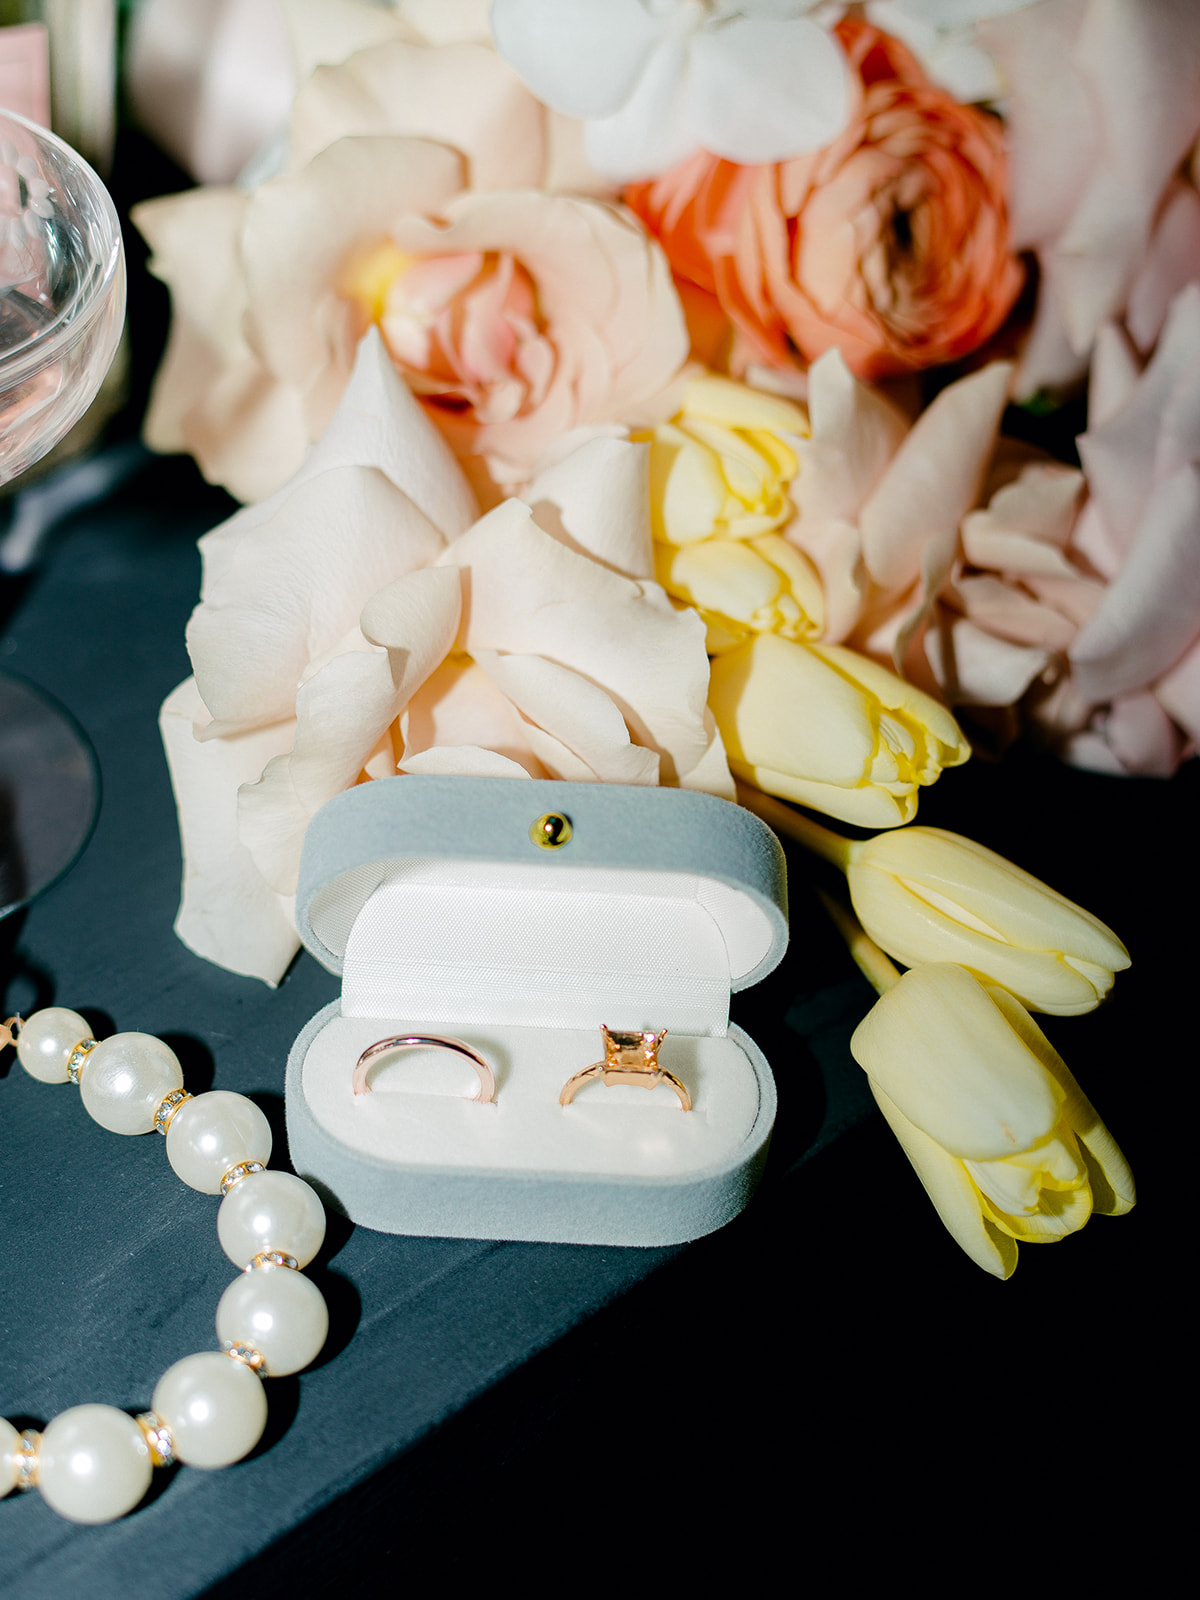 Flash photography used in flat lay photo featuring blue velvet ring box and pastel yellow and pink with a punch of bright orange in bride's bouquet